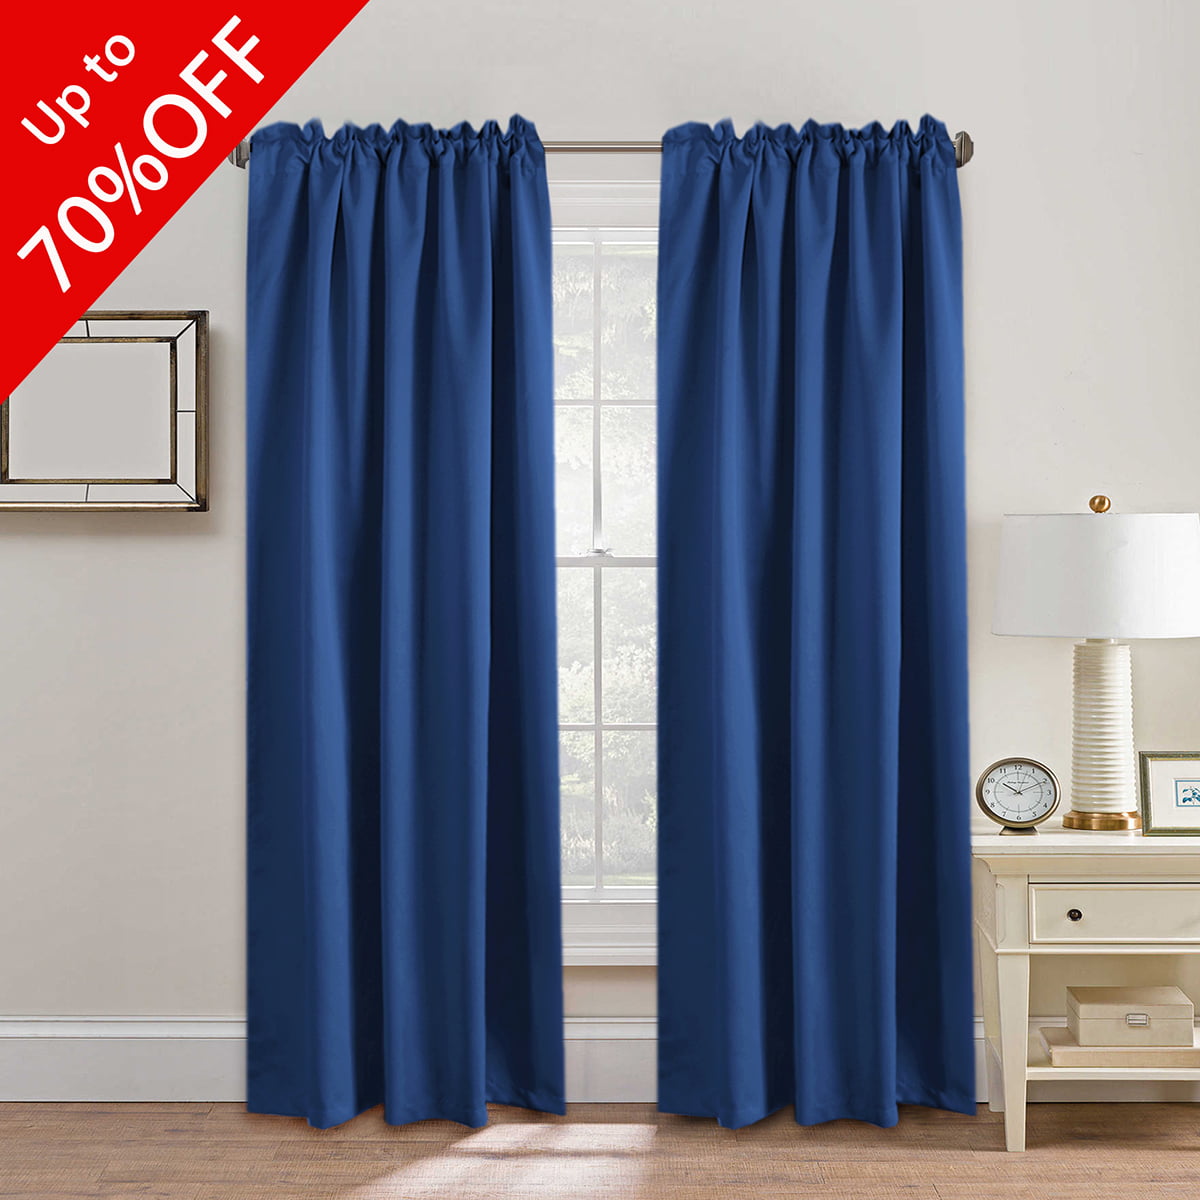 Full Blackout Curtains for Bedroom, Thermal Insulated ...